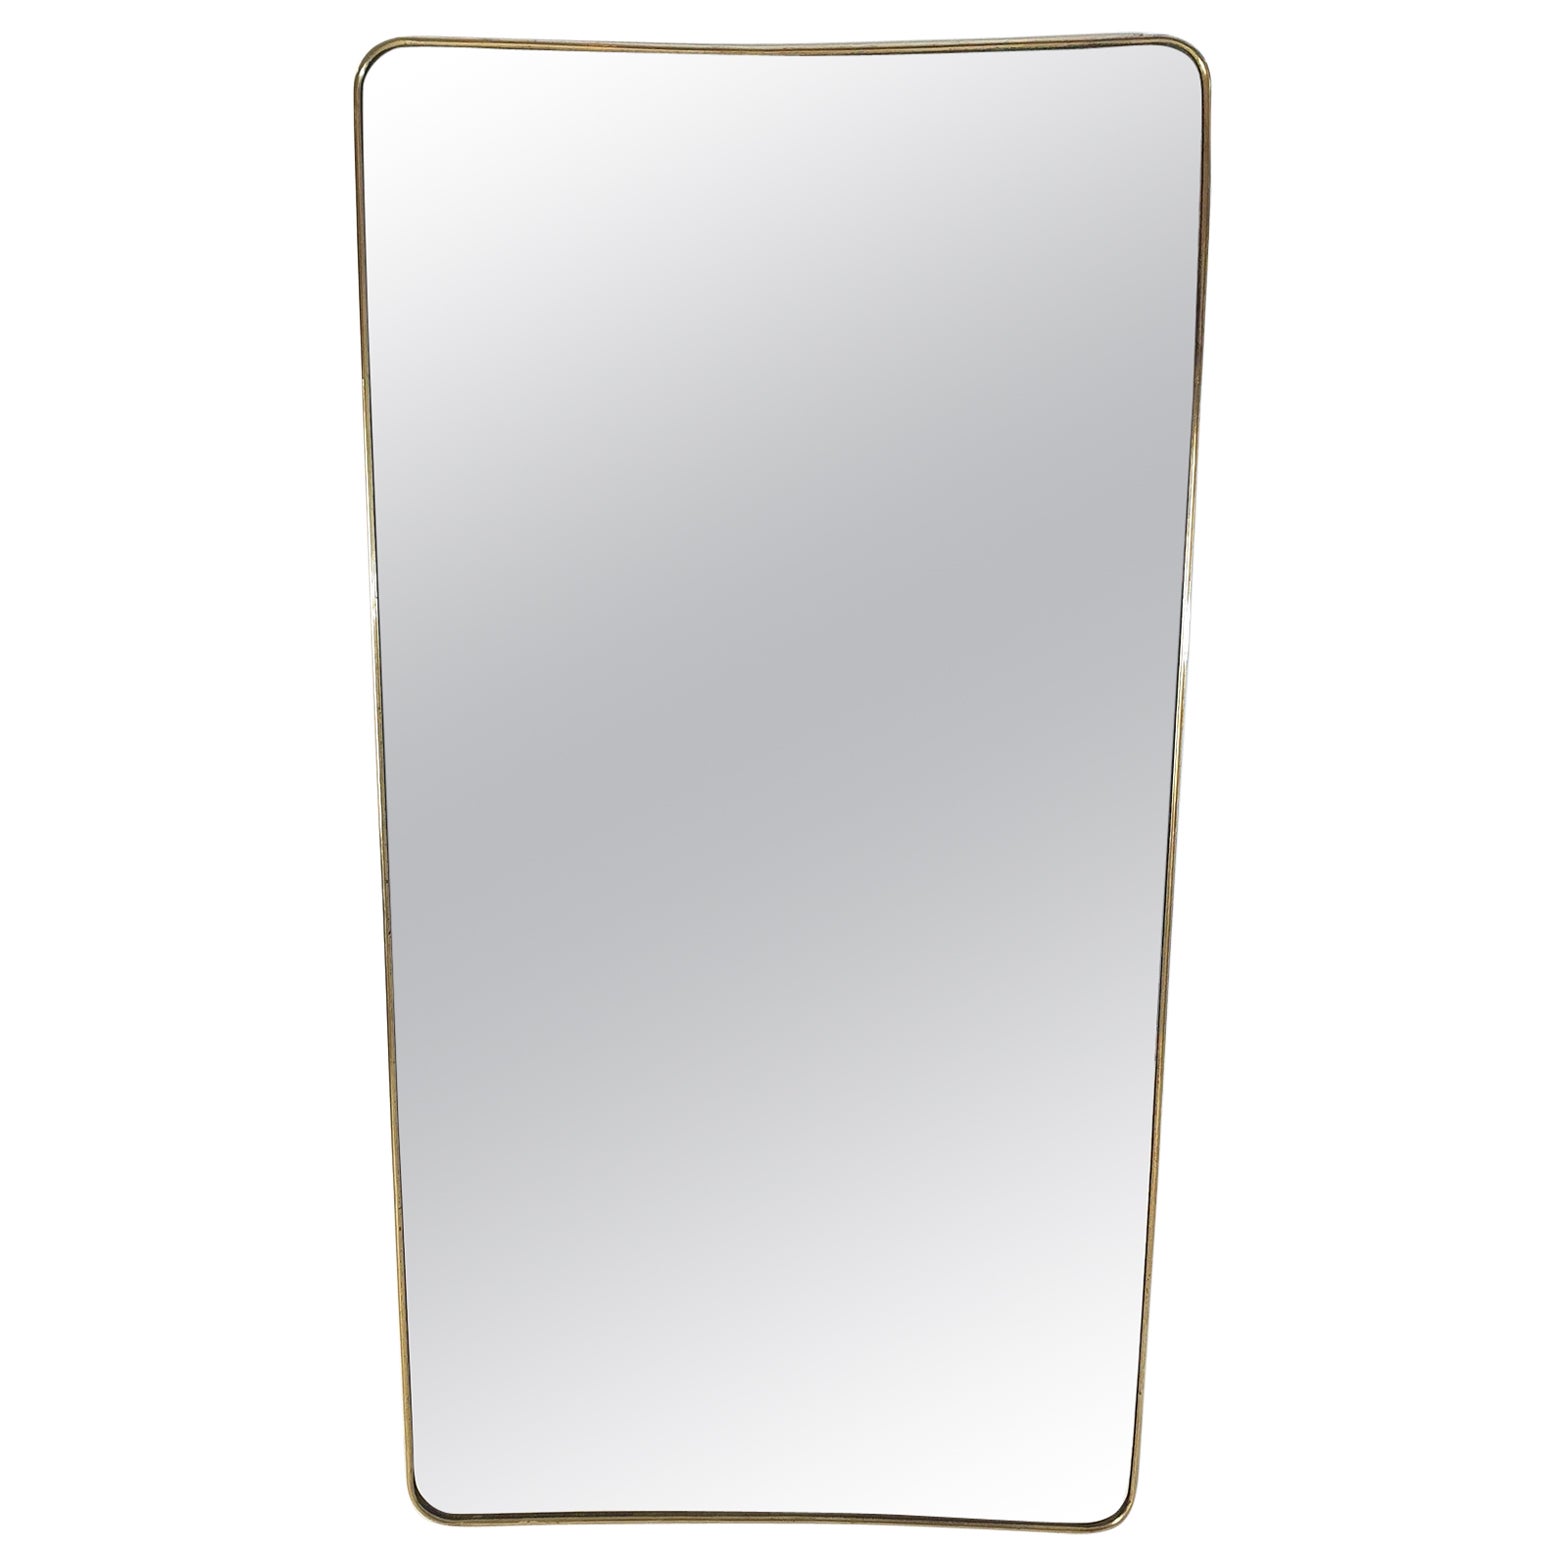 Full Lenght Mid-Century Mirror attributed to Gio Ponti  